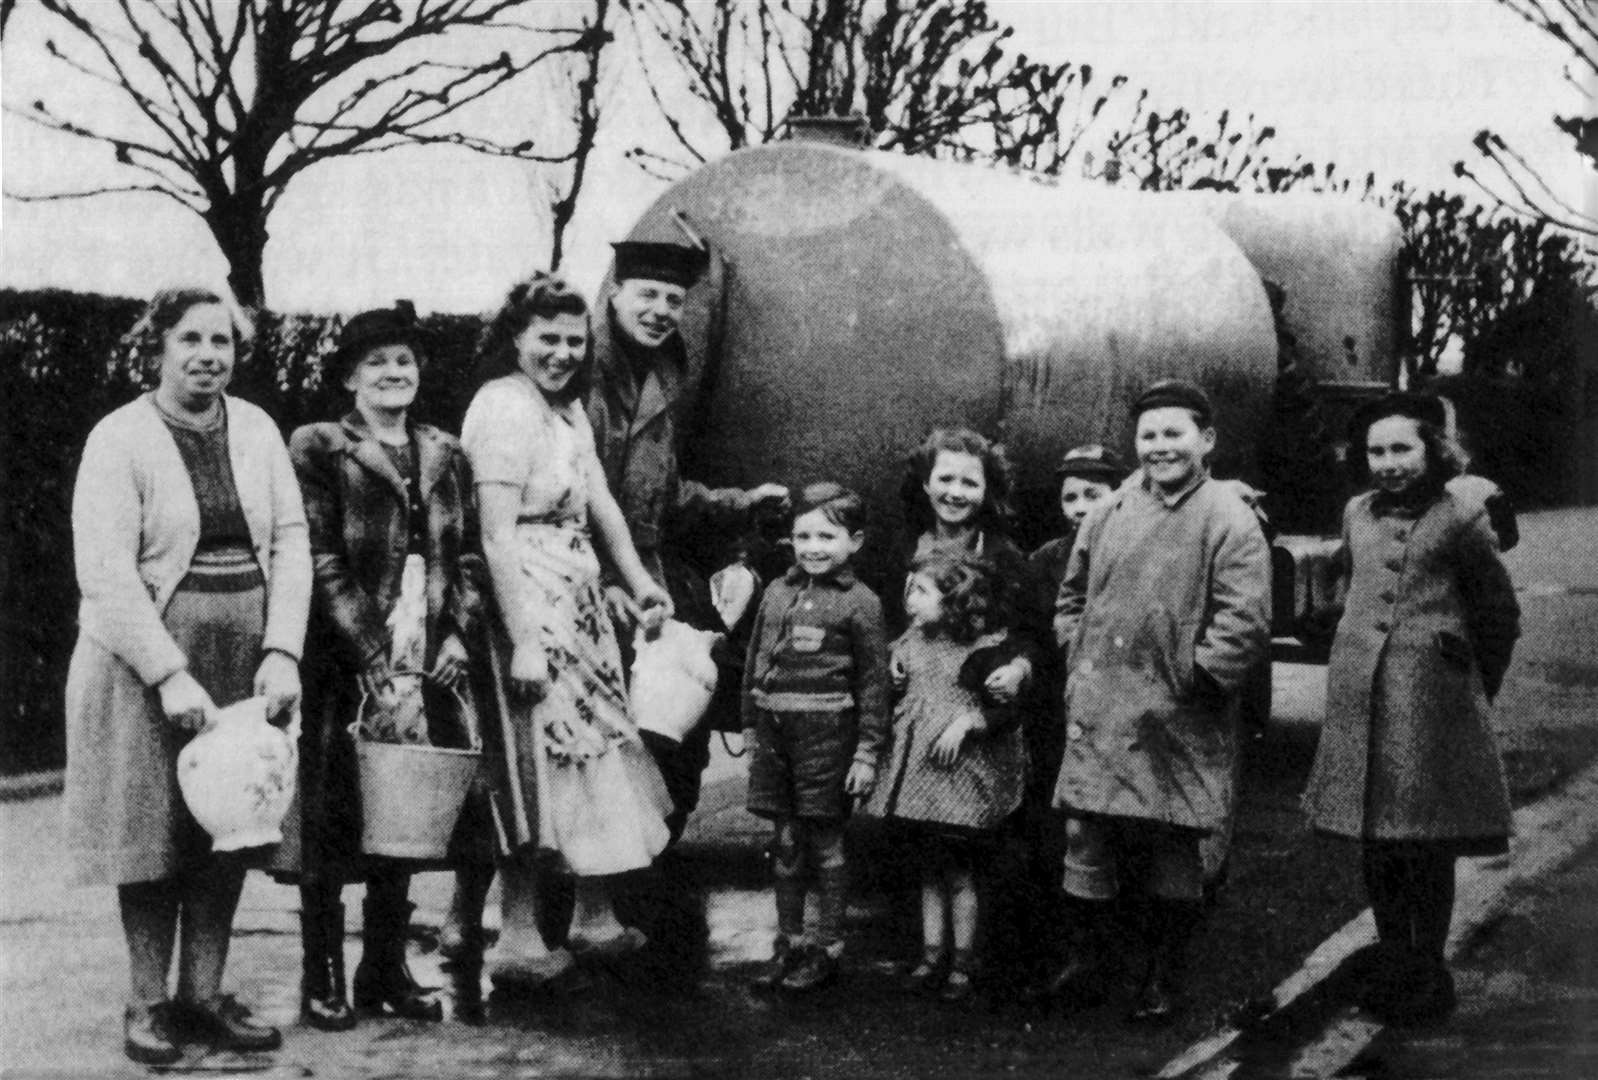 Women and children queue for fresh water from a bowser in Beach Street, Sheerness, after the flood